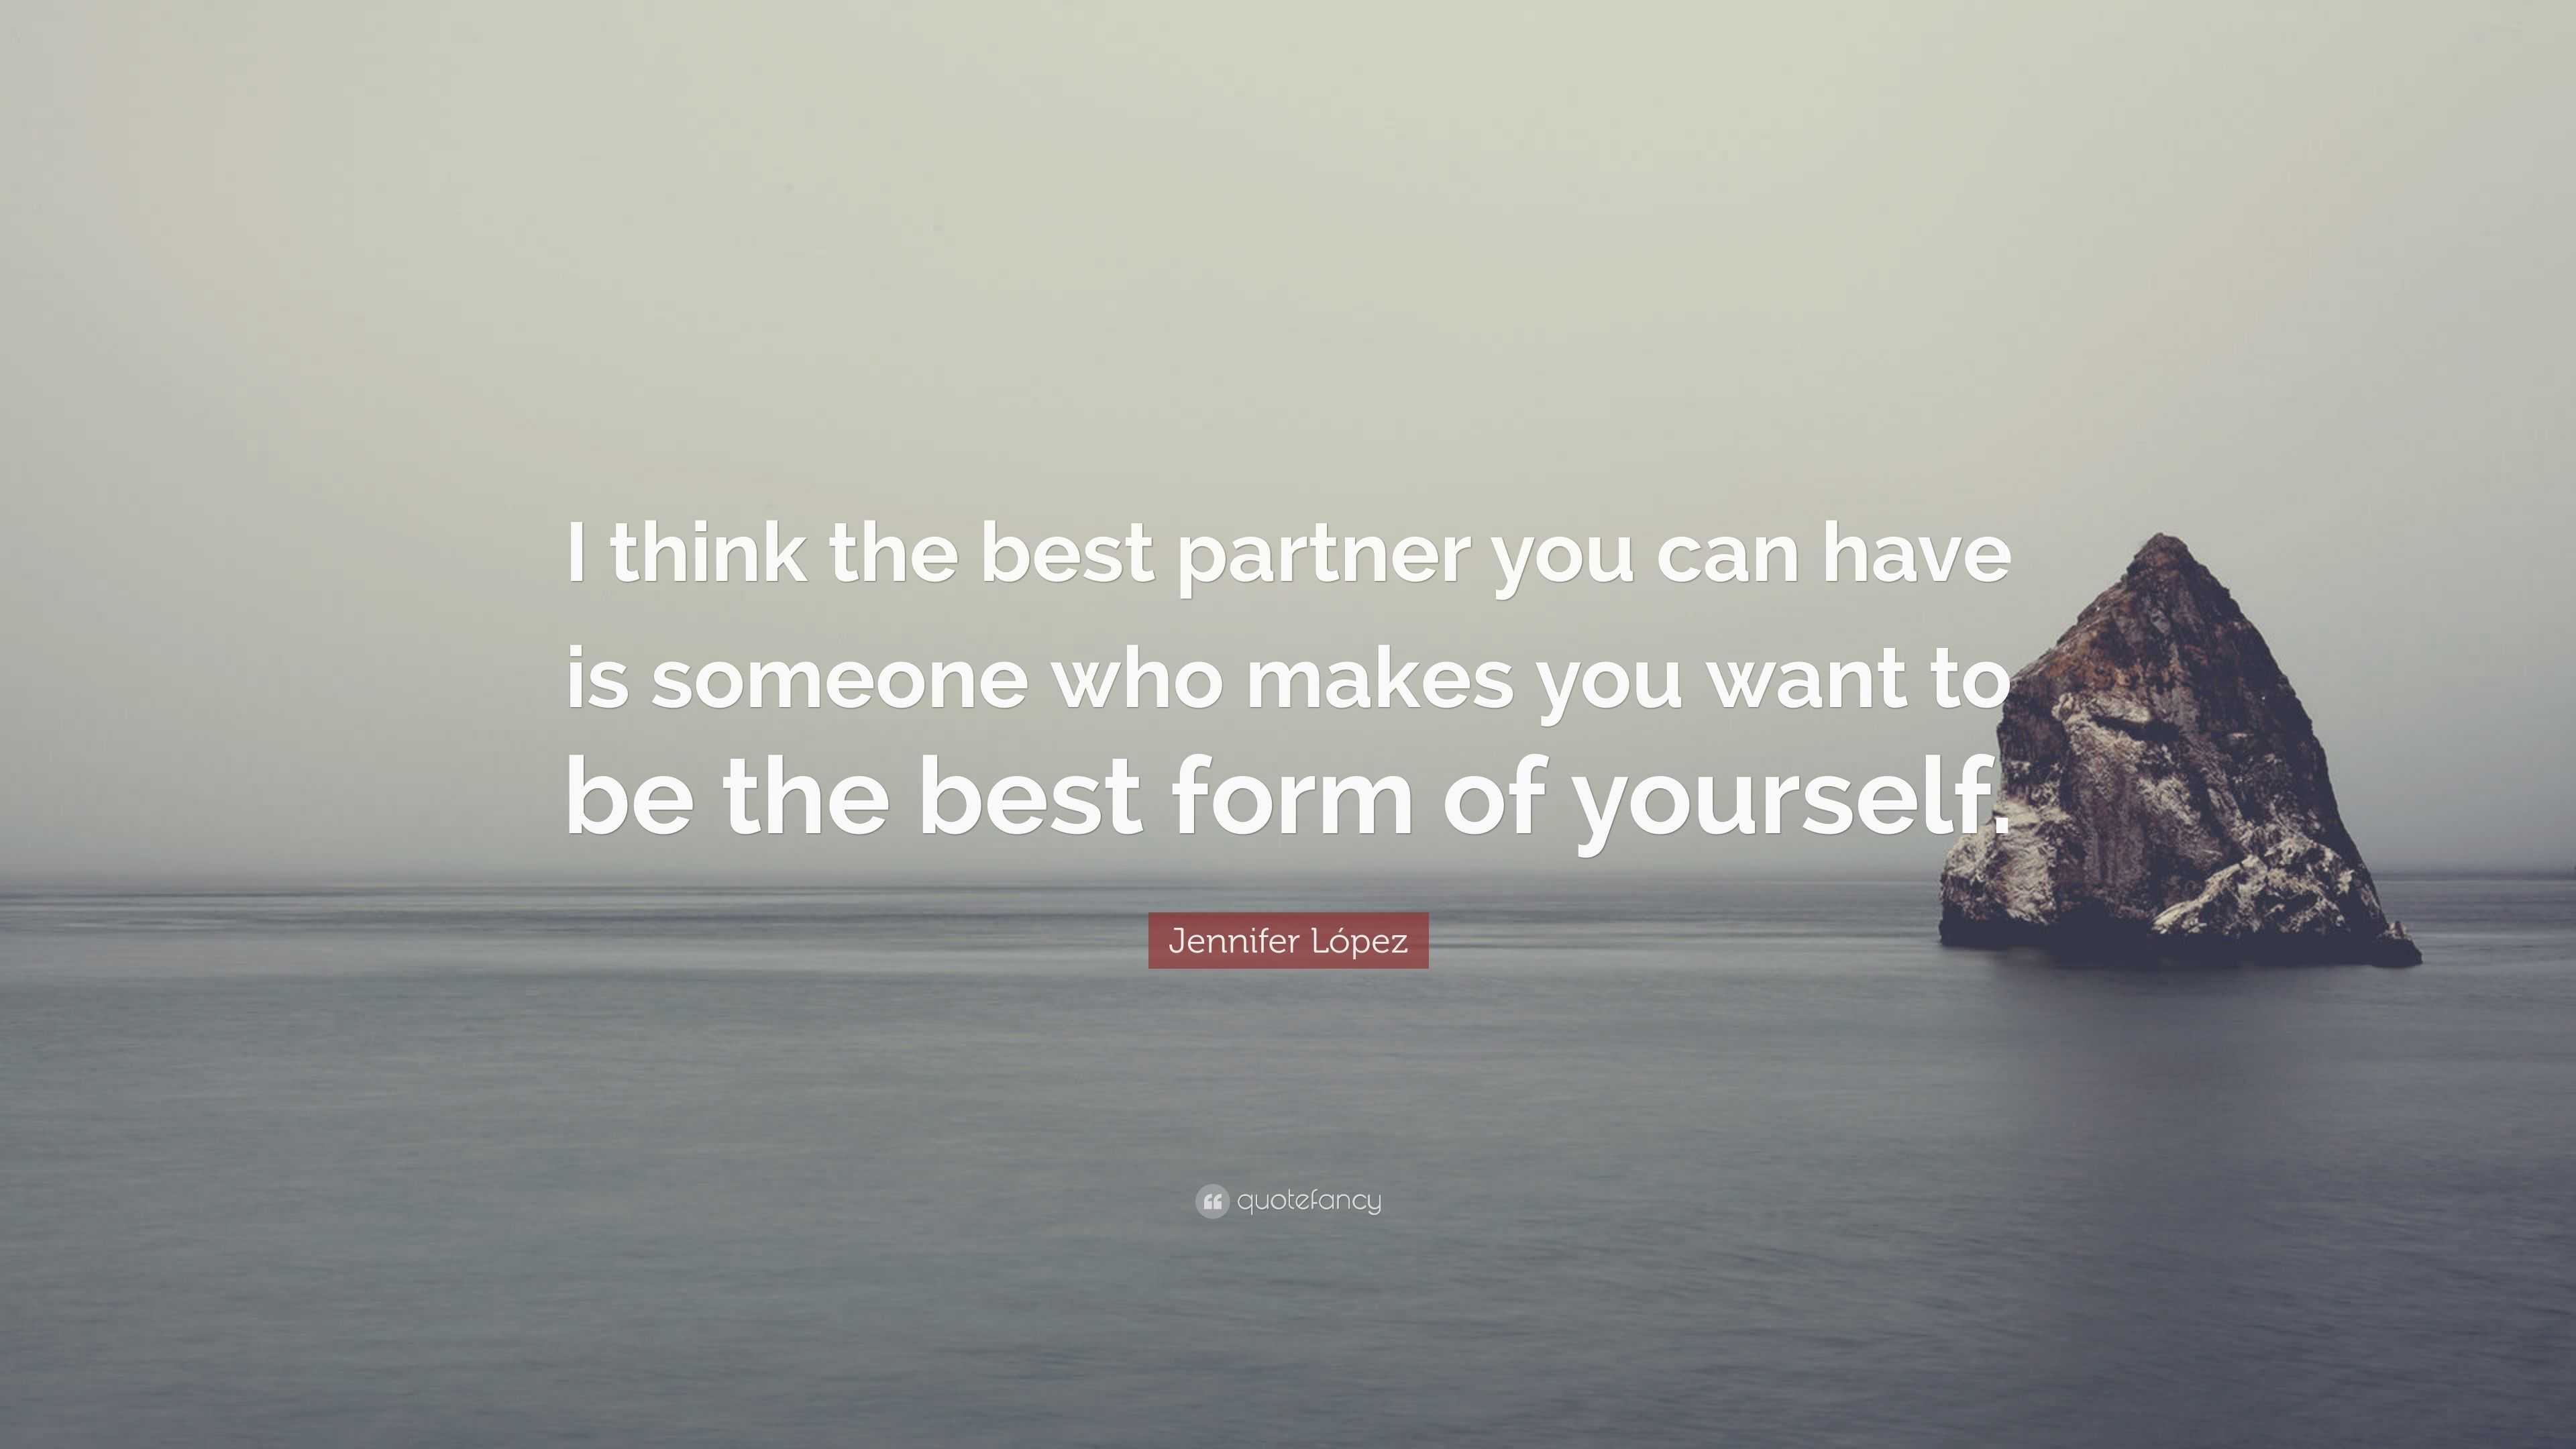 How Working on Yourself Makes You a Better Spouse